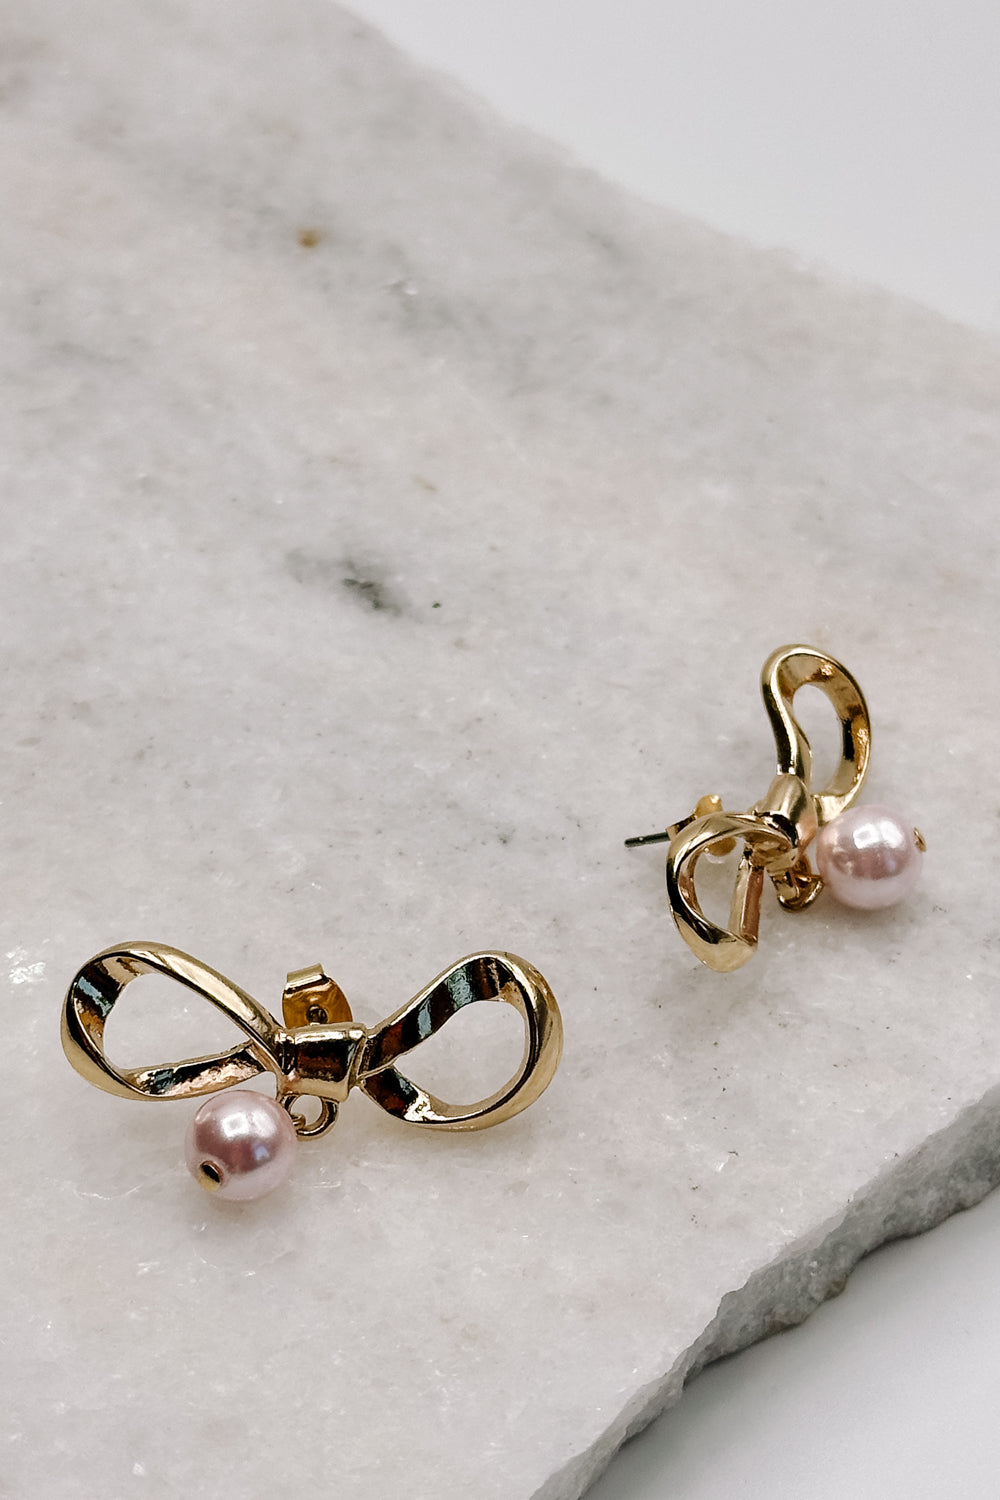 close up view of the Iris Pink & Gold Bow Stud Earring which features gold bow shaped studs with light pink pearl beads